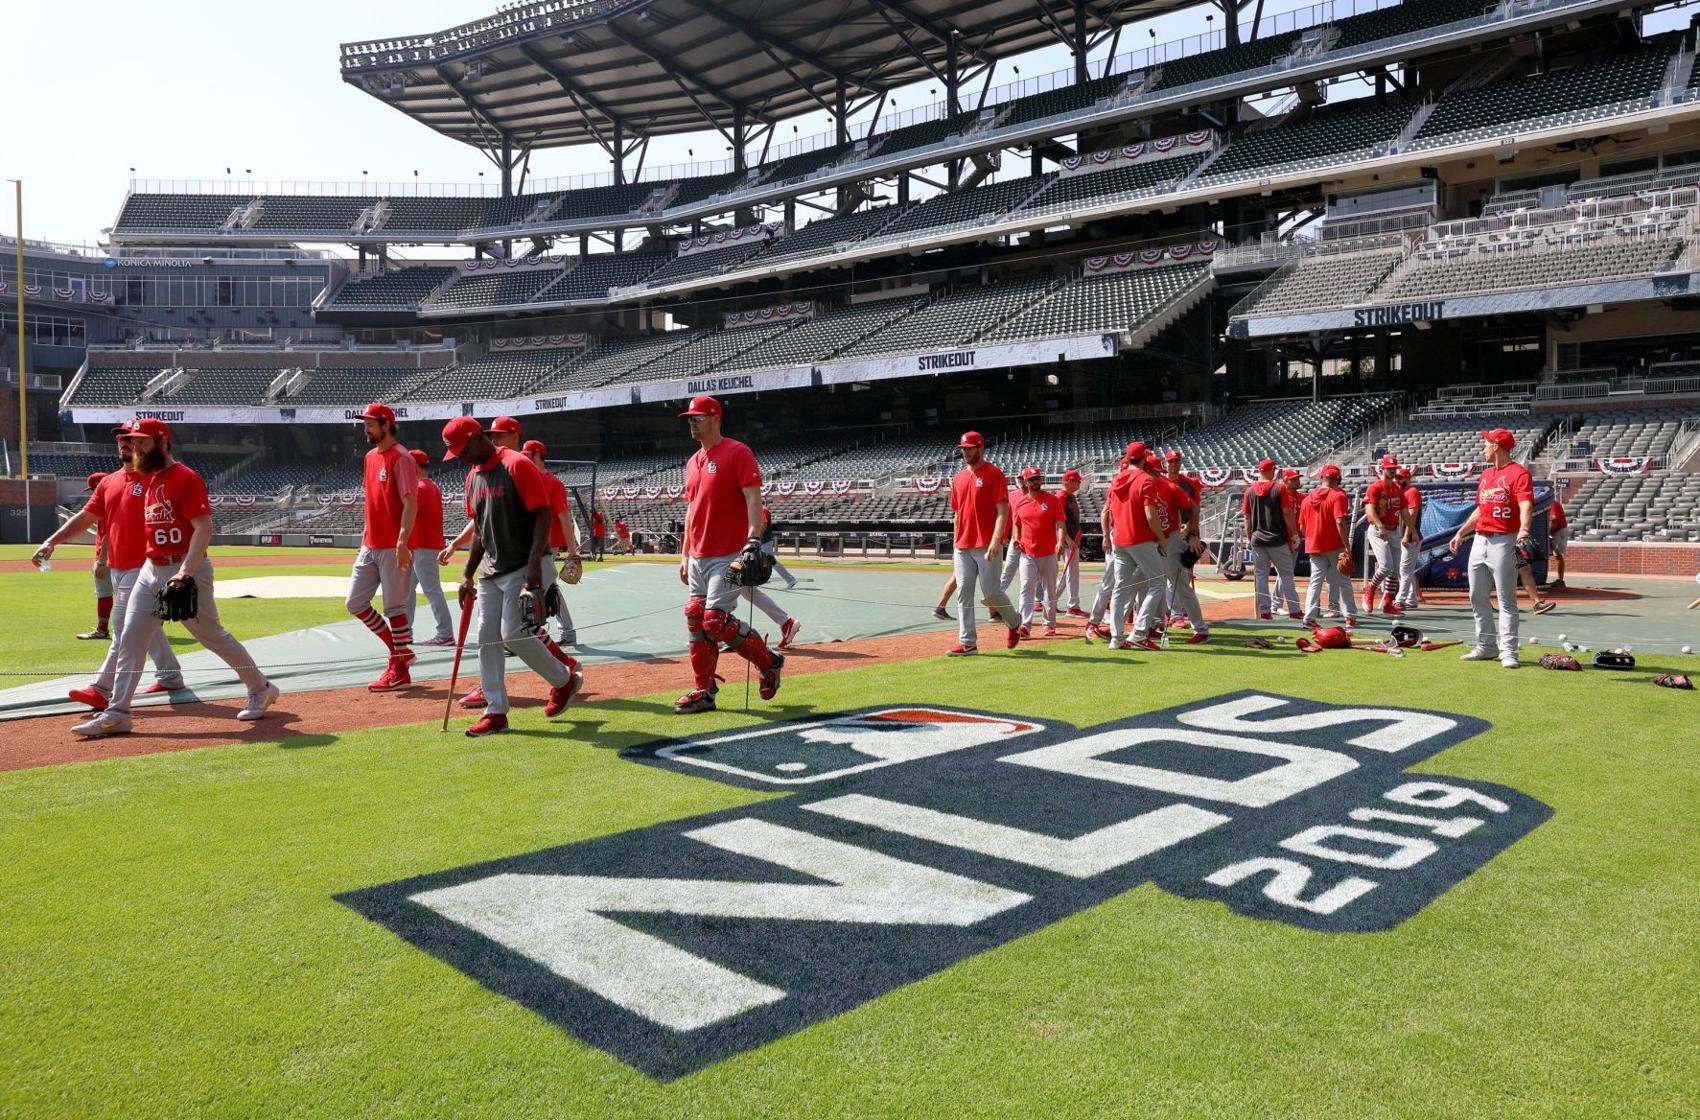 St. Louis Cardinals practice before Game 1 of NLDS in Atlanta